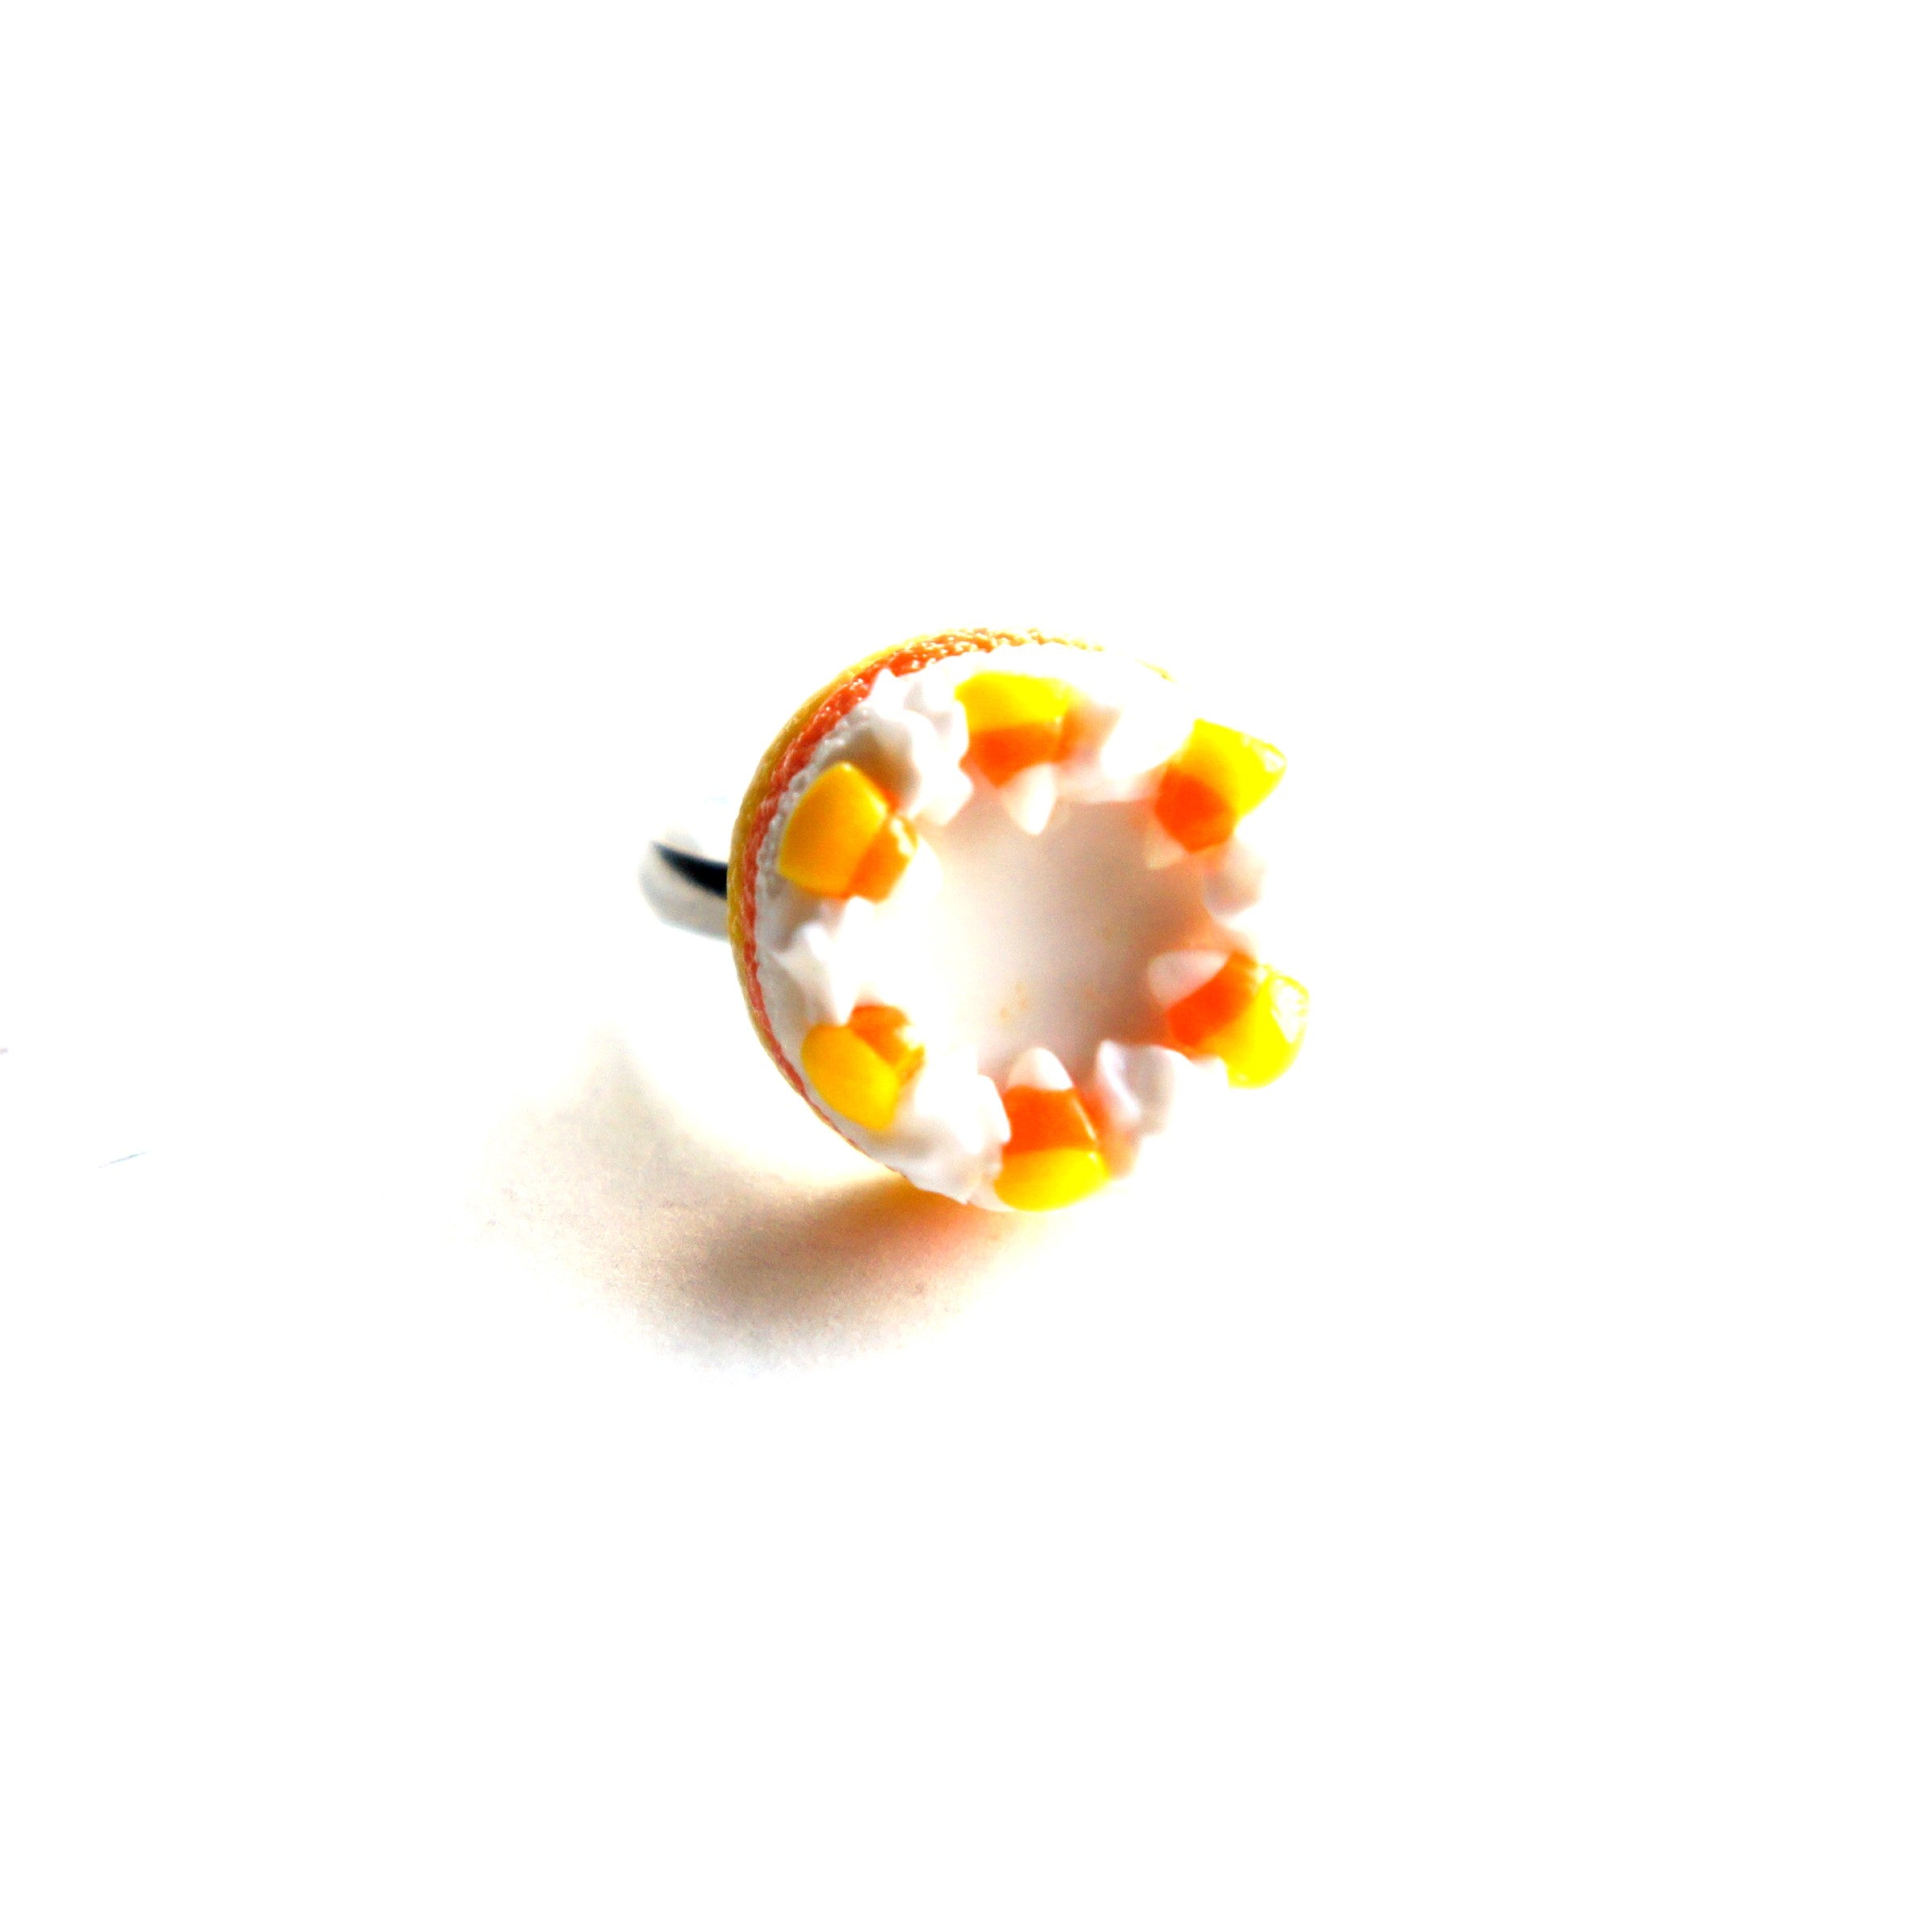 Candycorn Cake Ring - Jillicious charms and accessories